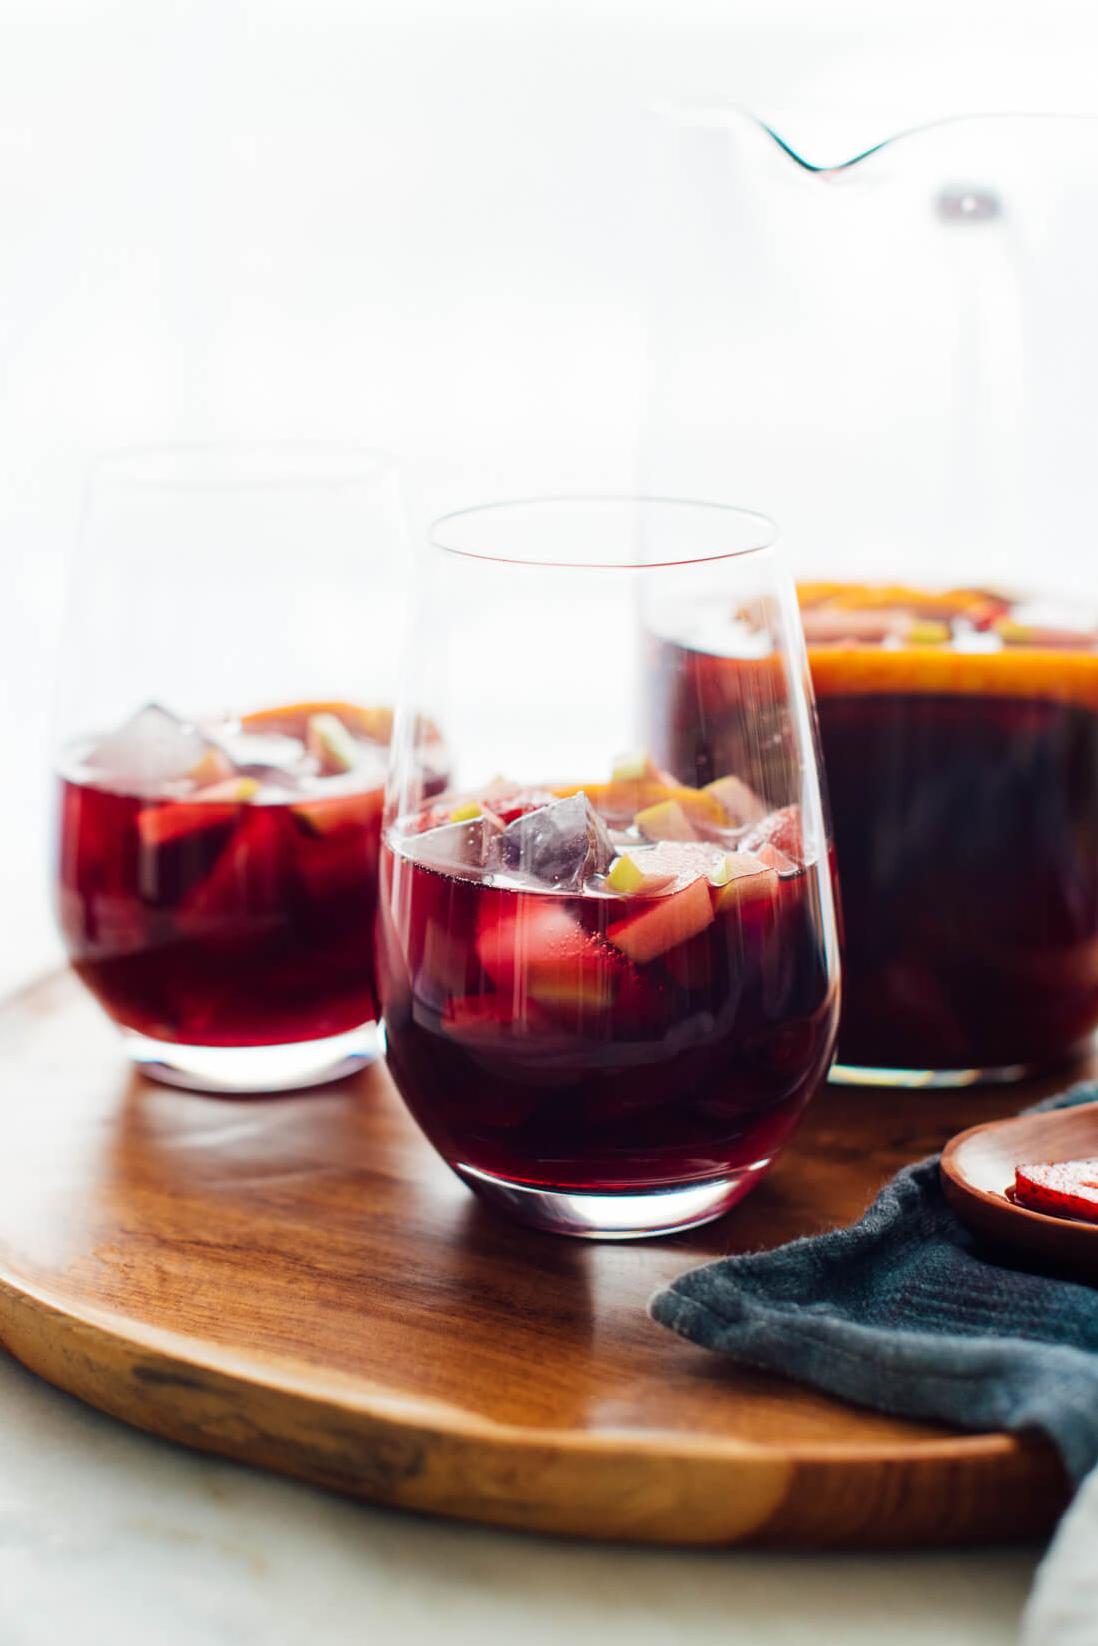  This sangria recipe features a blend of red wine, fresh fruit, and a hint of brandy